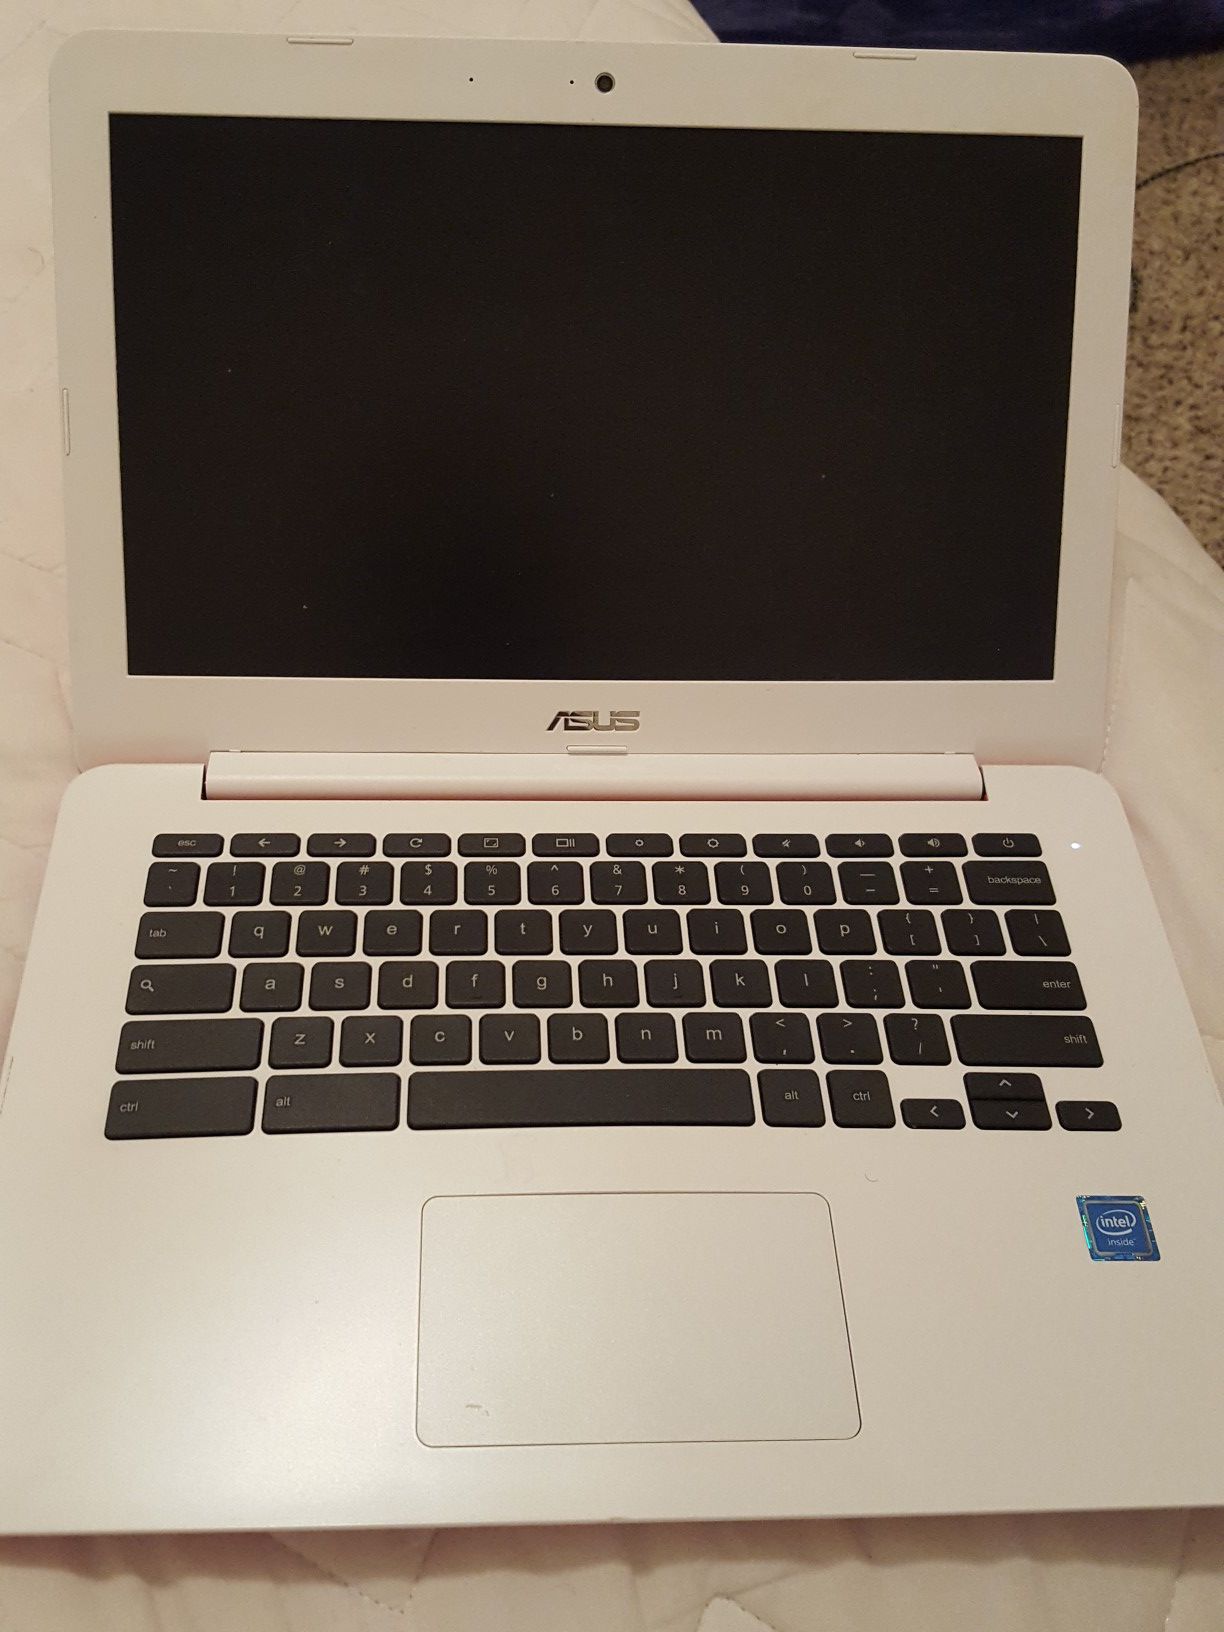 Asus300 red chrome book laptop